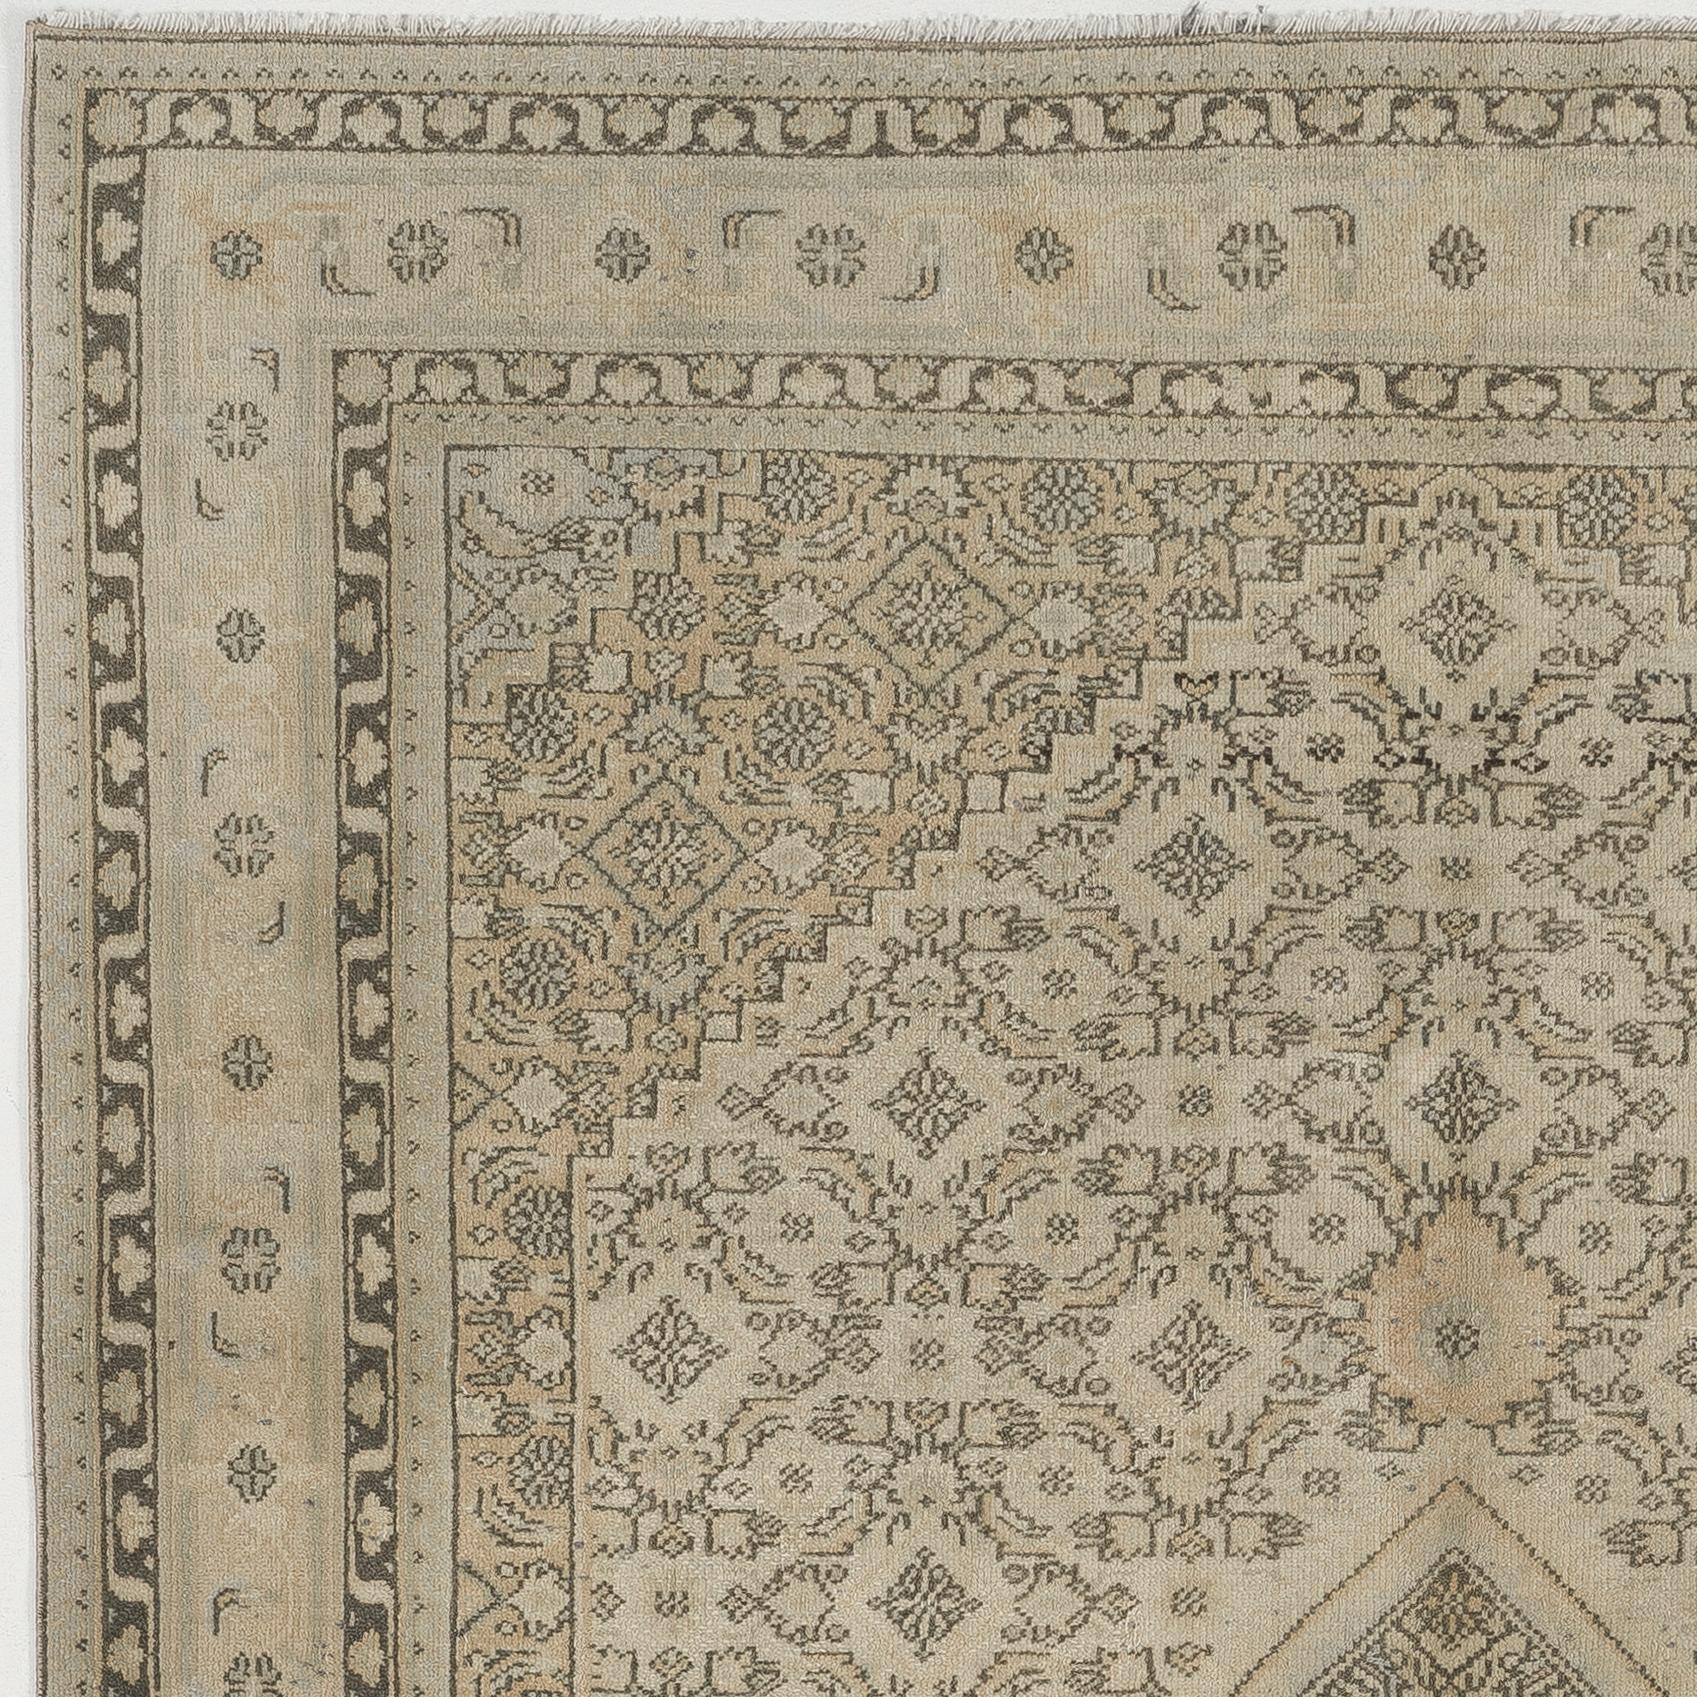 A finely hand-knotted vintage Turkish carpet from 1960s with a beautiful, nuanced color palette of soft, neutral tones including stone beige, light brown, very light sage green as well as dark green tinged with black.  The rug features a lozenge